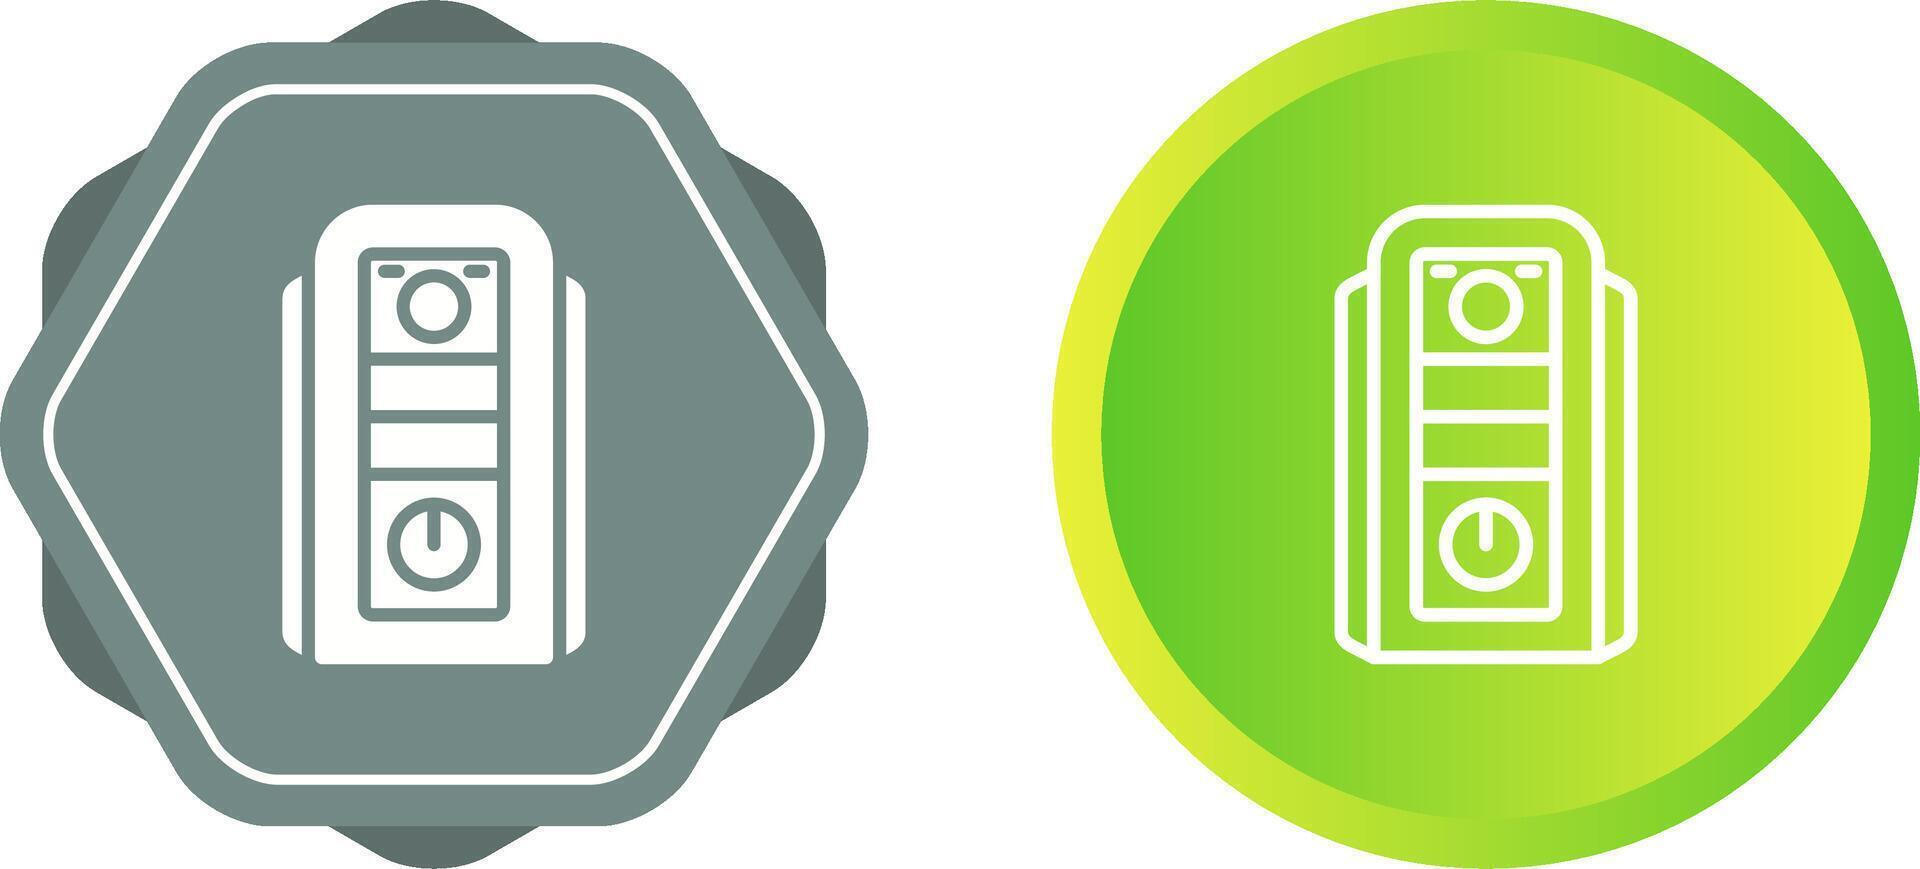 Tower Vector Icon